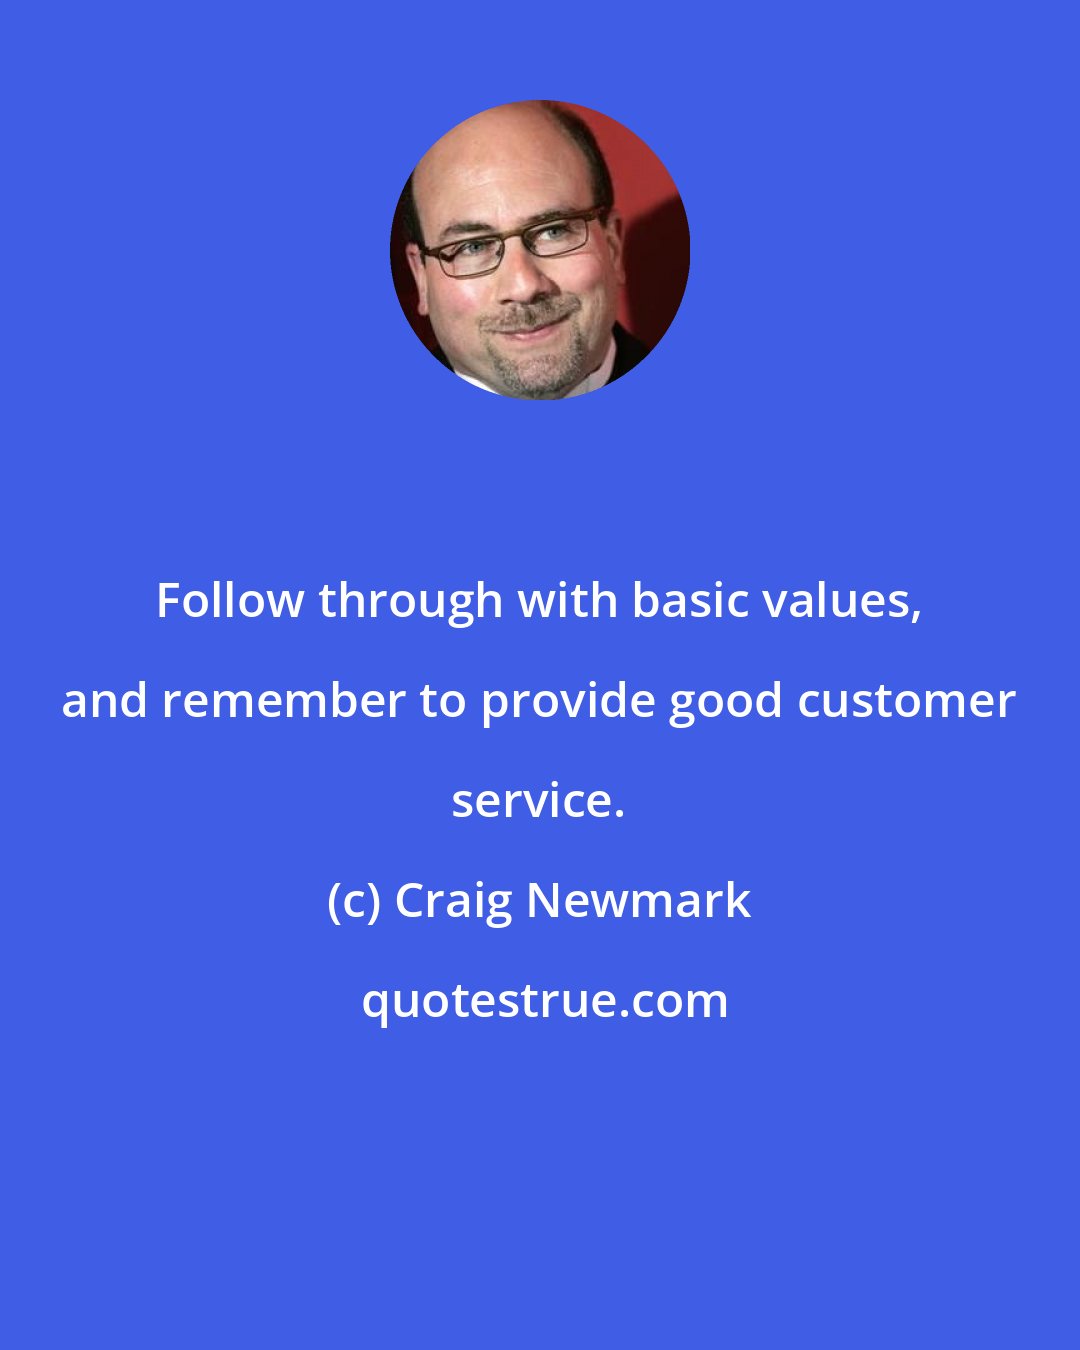 Craig Newmark: Follow through with basic values, and remember to provide good customer service.